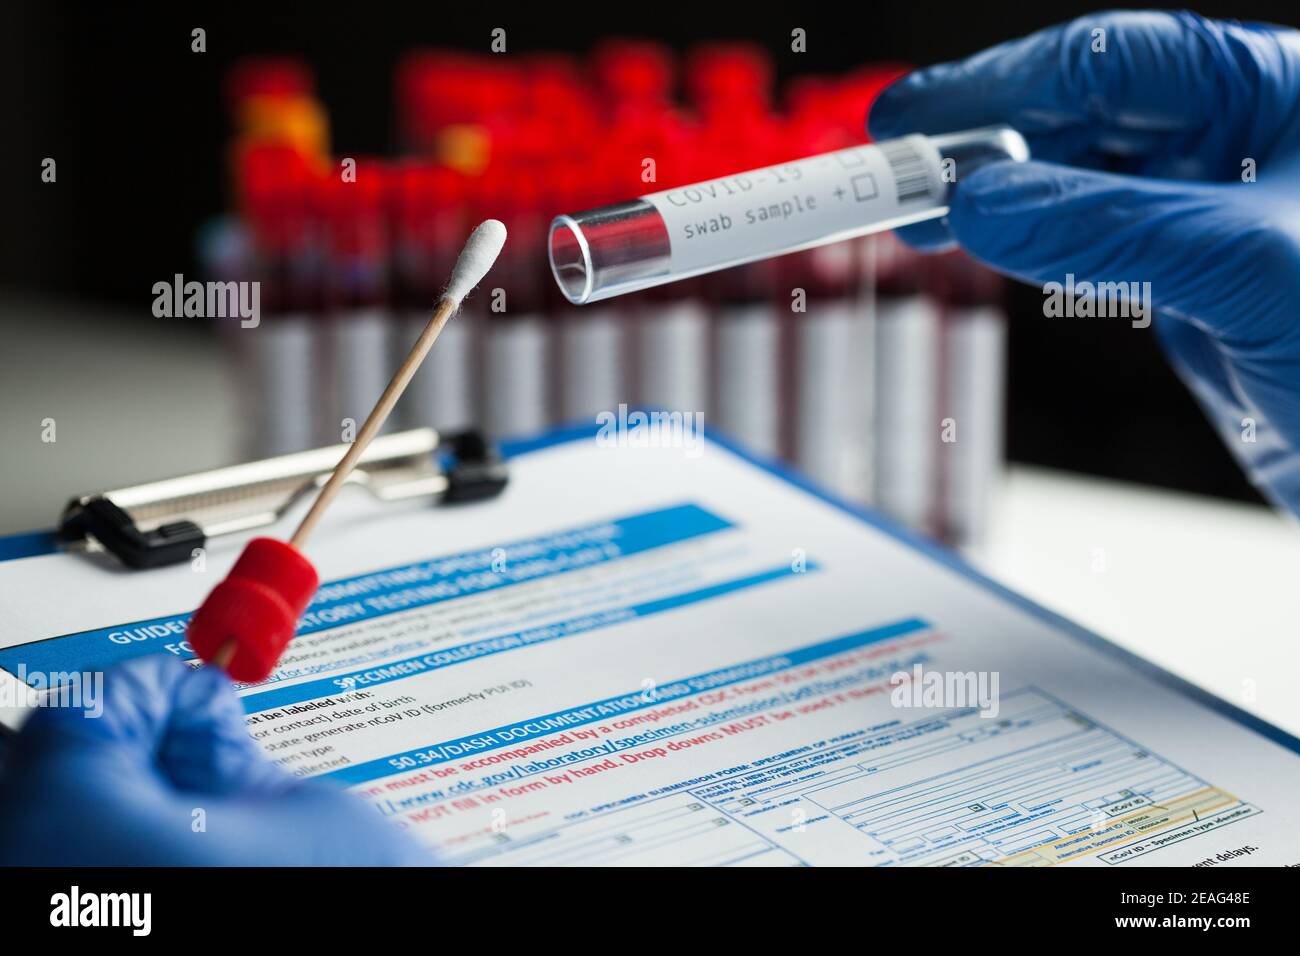 Lab technician holding swab collection kit,Coronavirus COVID-19 specimen collecting equipment,DNA nasal and oral swabbing for PCR polymerase chain rea Stock Photo